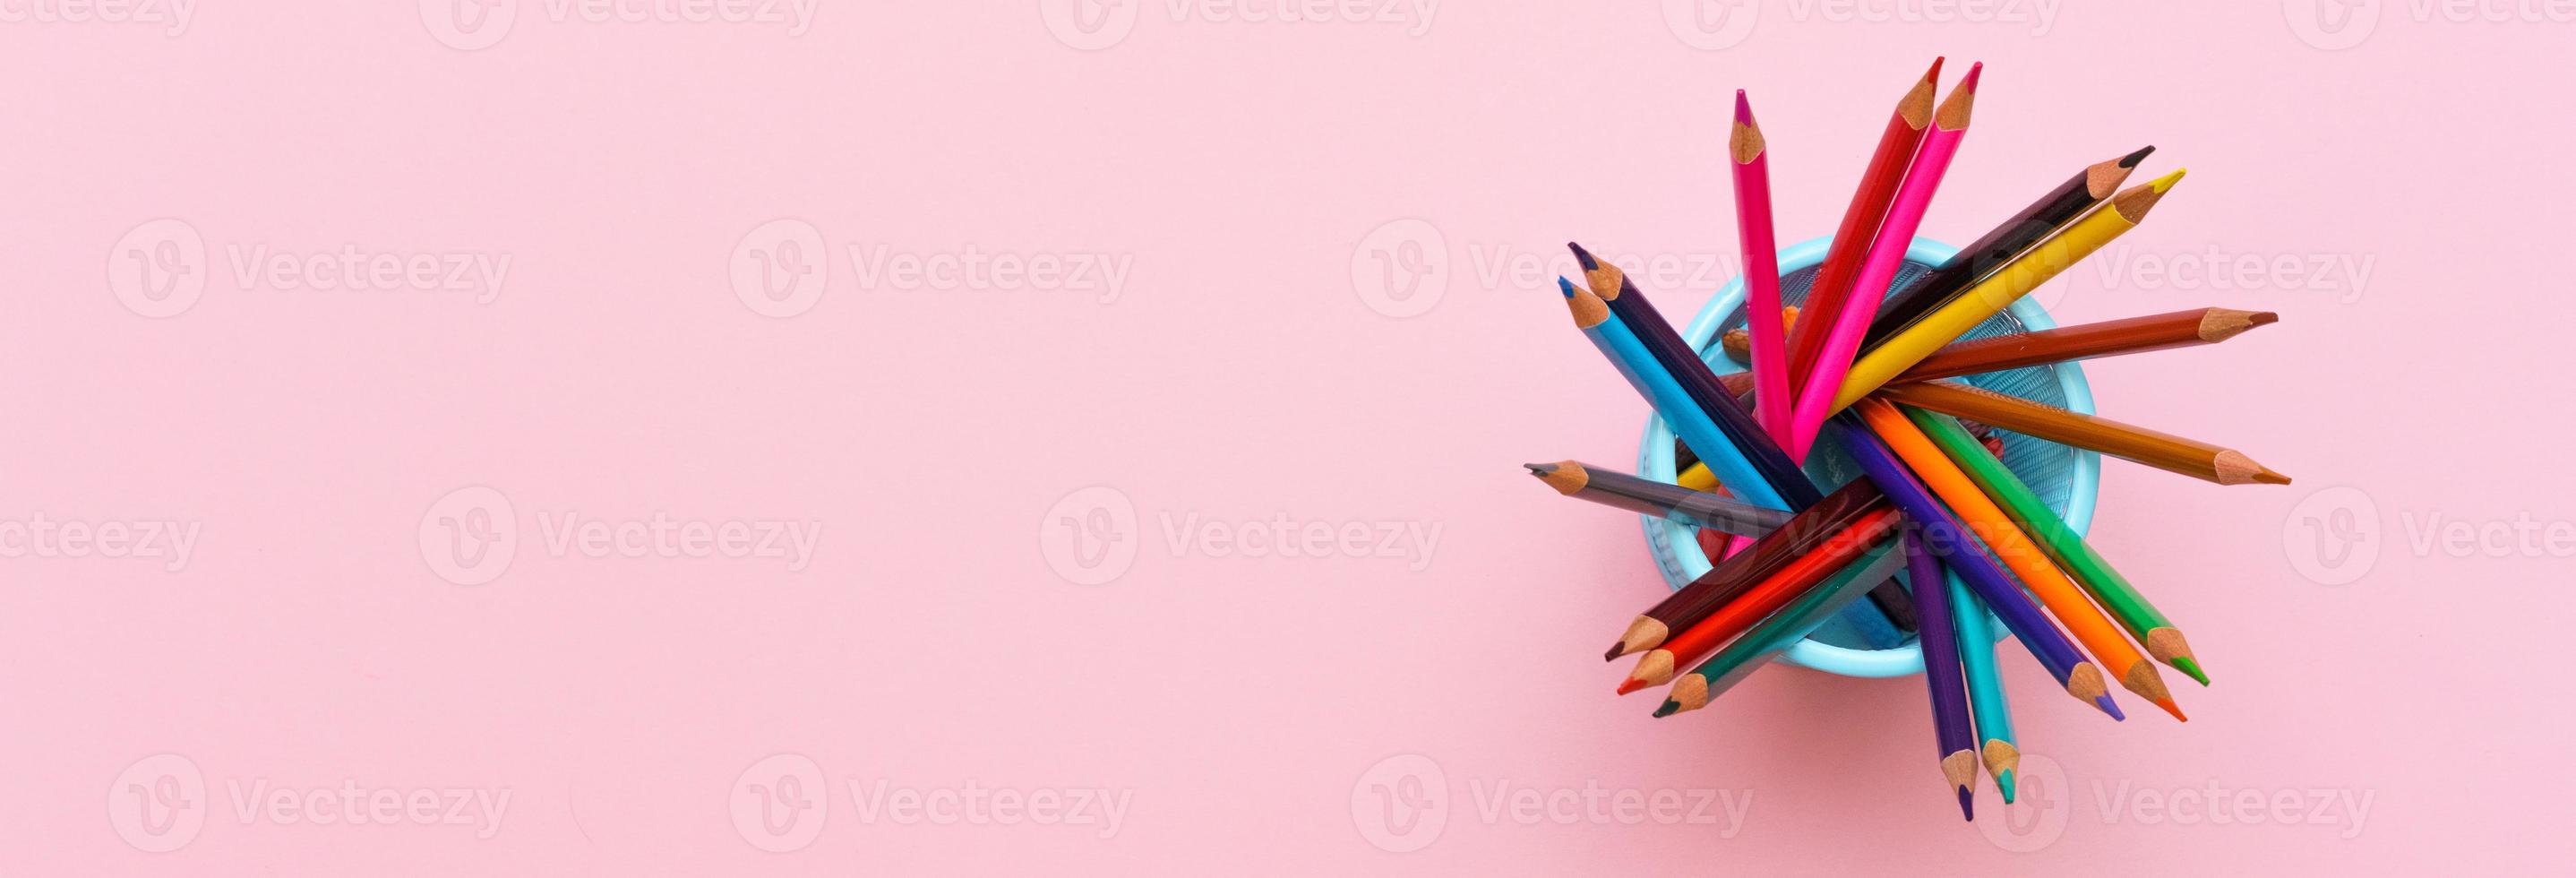 Colored wooden pencils on pink background, education concept. photo